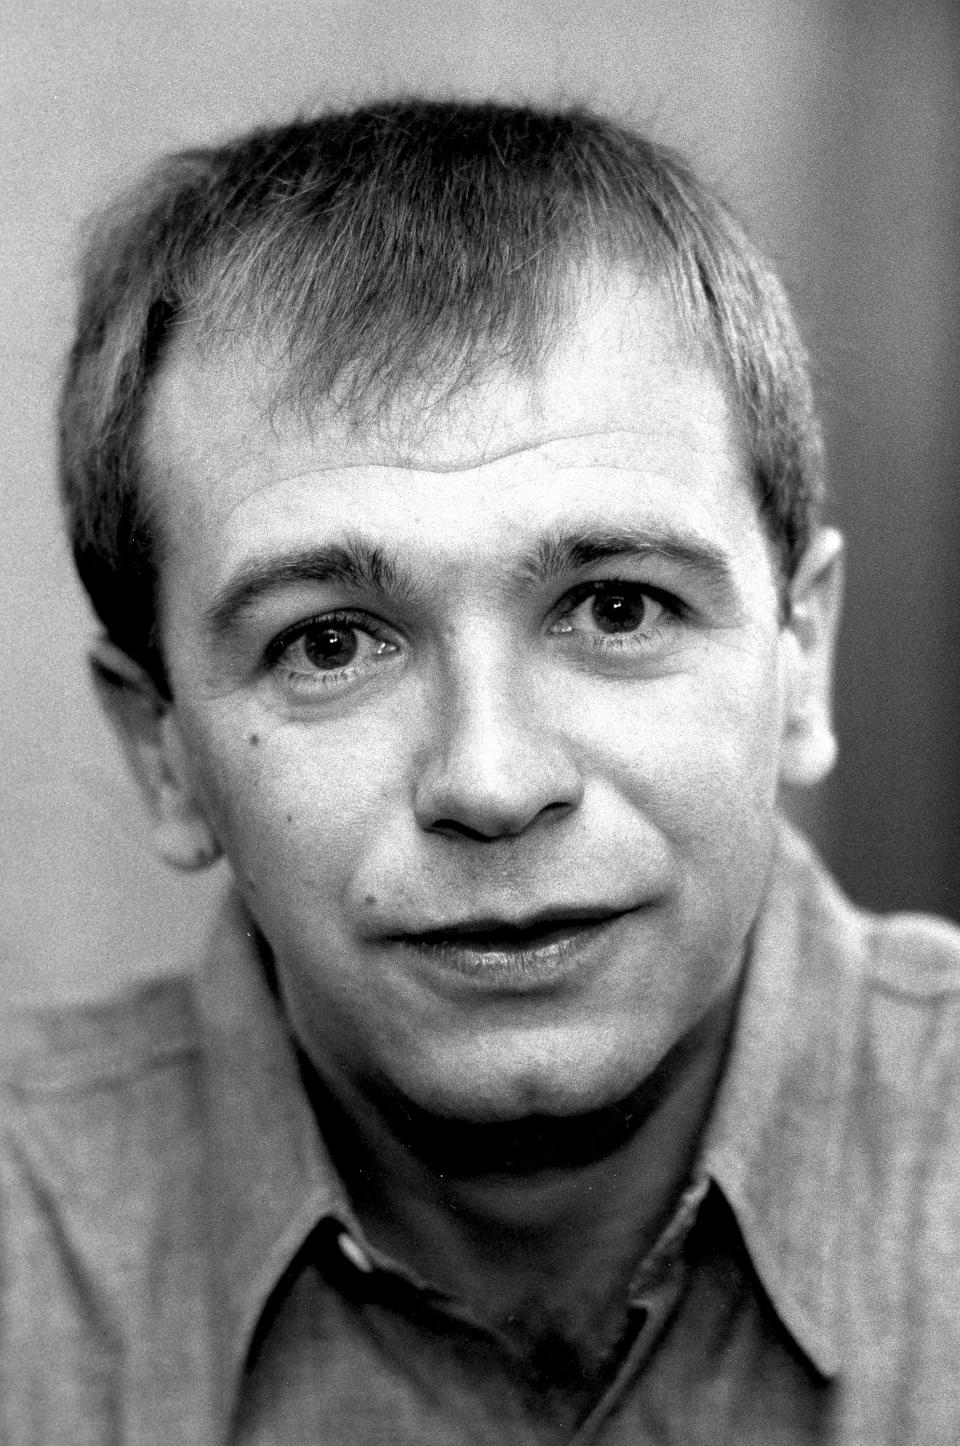 FILE - This 1974 file photo shows American playwright Terrence McNally in New York. McNally, one of America’s great playwrights whose prolific career included winning Tony Awards for the plays "Love! Valour! Compassion!" and "Master Class" and the musicals "Ragtime" and "Kiss of the Spider Woman," died Tuesday, March 24, 2020, of complications from the coronavirus. He was 81. (AP Photo/Jerry T. Mosey, File)